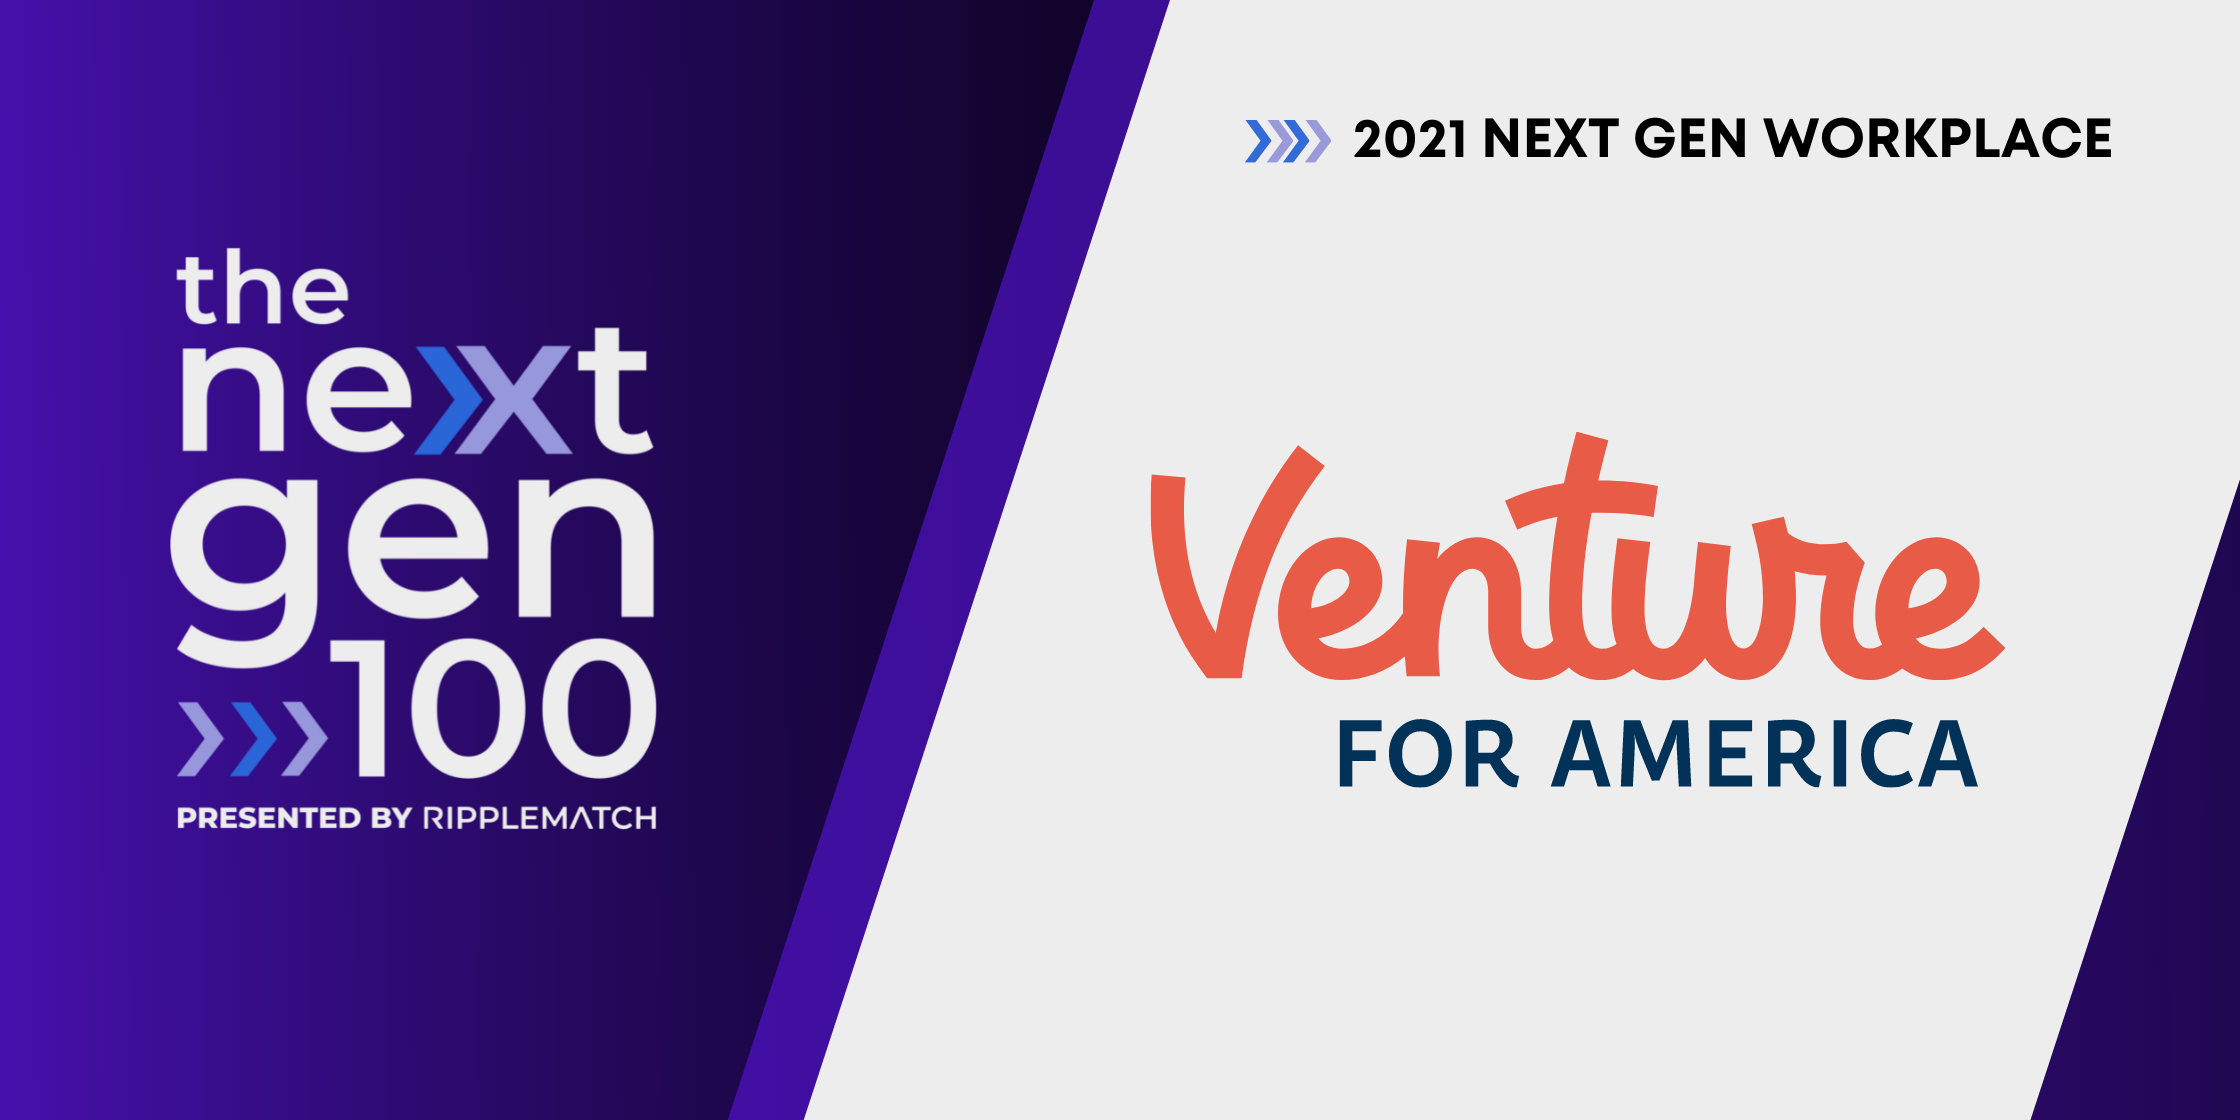 Venture For America - Landing page & social image